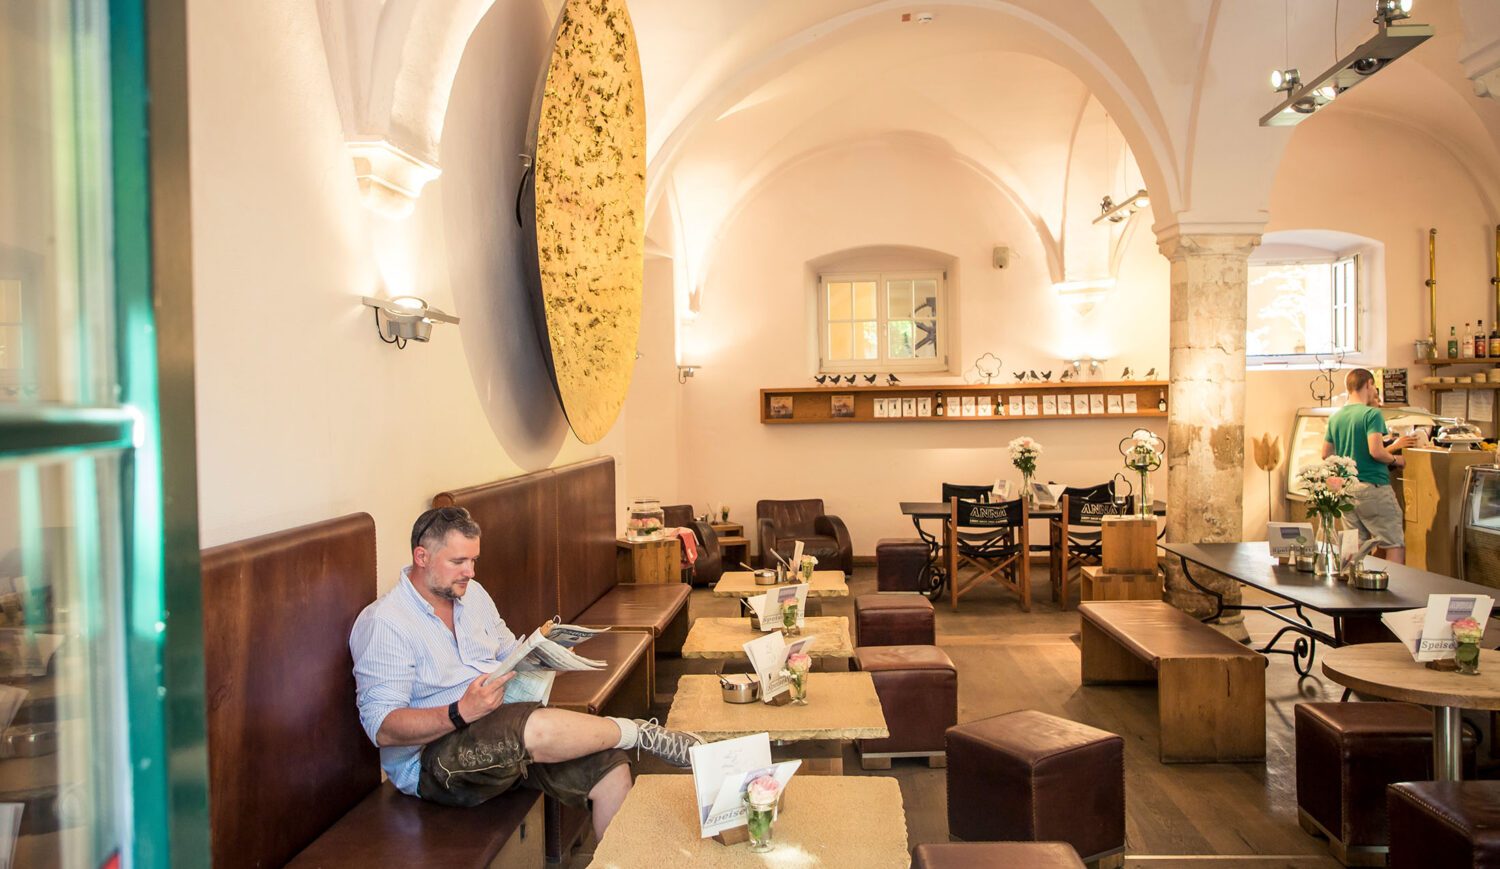 Another insider recommendation from Muk: the Cafe Anna in Regensburg